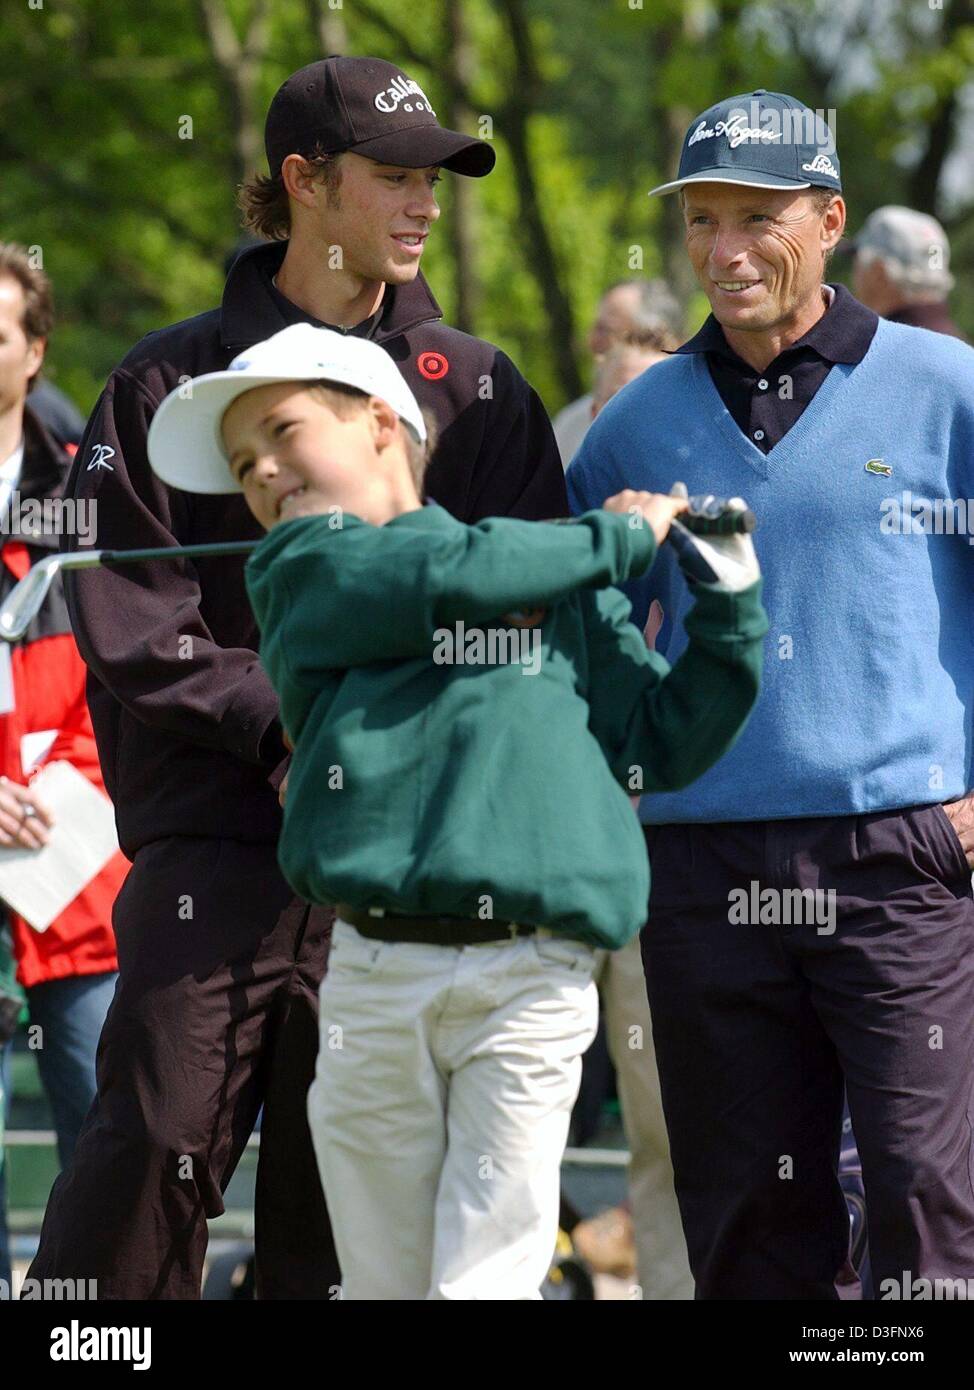 (dpa) - The US golf pros Bernhard Langer (R) and Ty Tyron give golf lessons to children on the Gut Kaden golf course in Hamburg, Germany, 13 May 2003. On 15 May the 'Deutsche Bank' - SAP Open started in Gut Kaden. Stock Photo